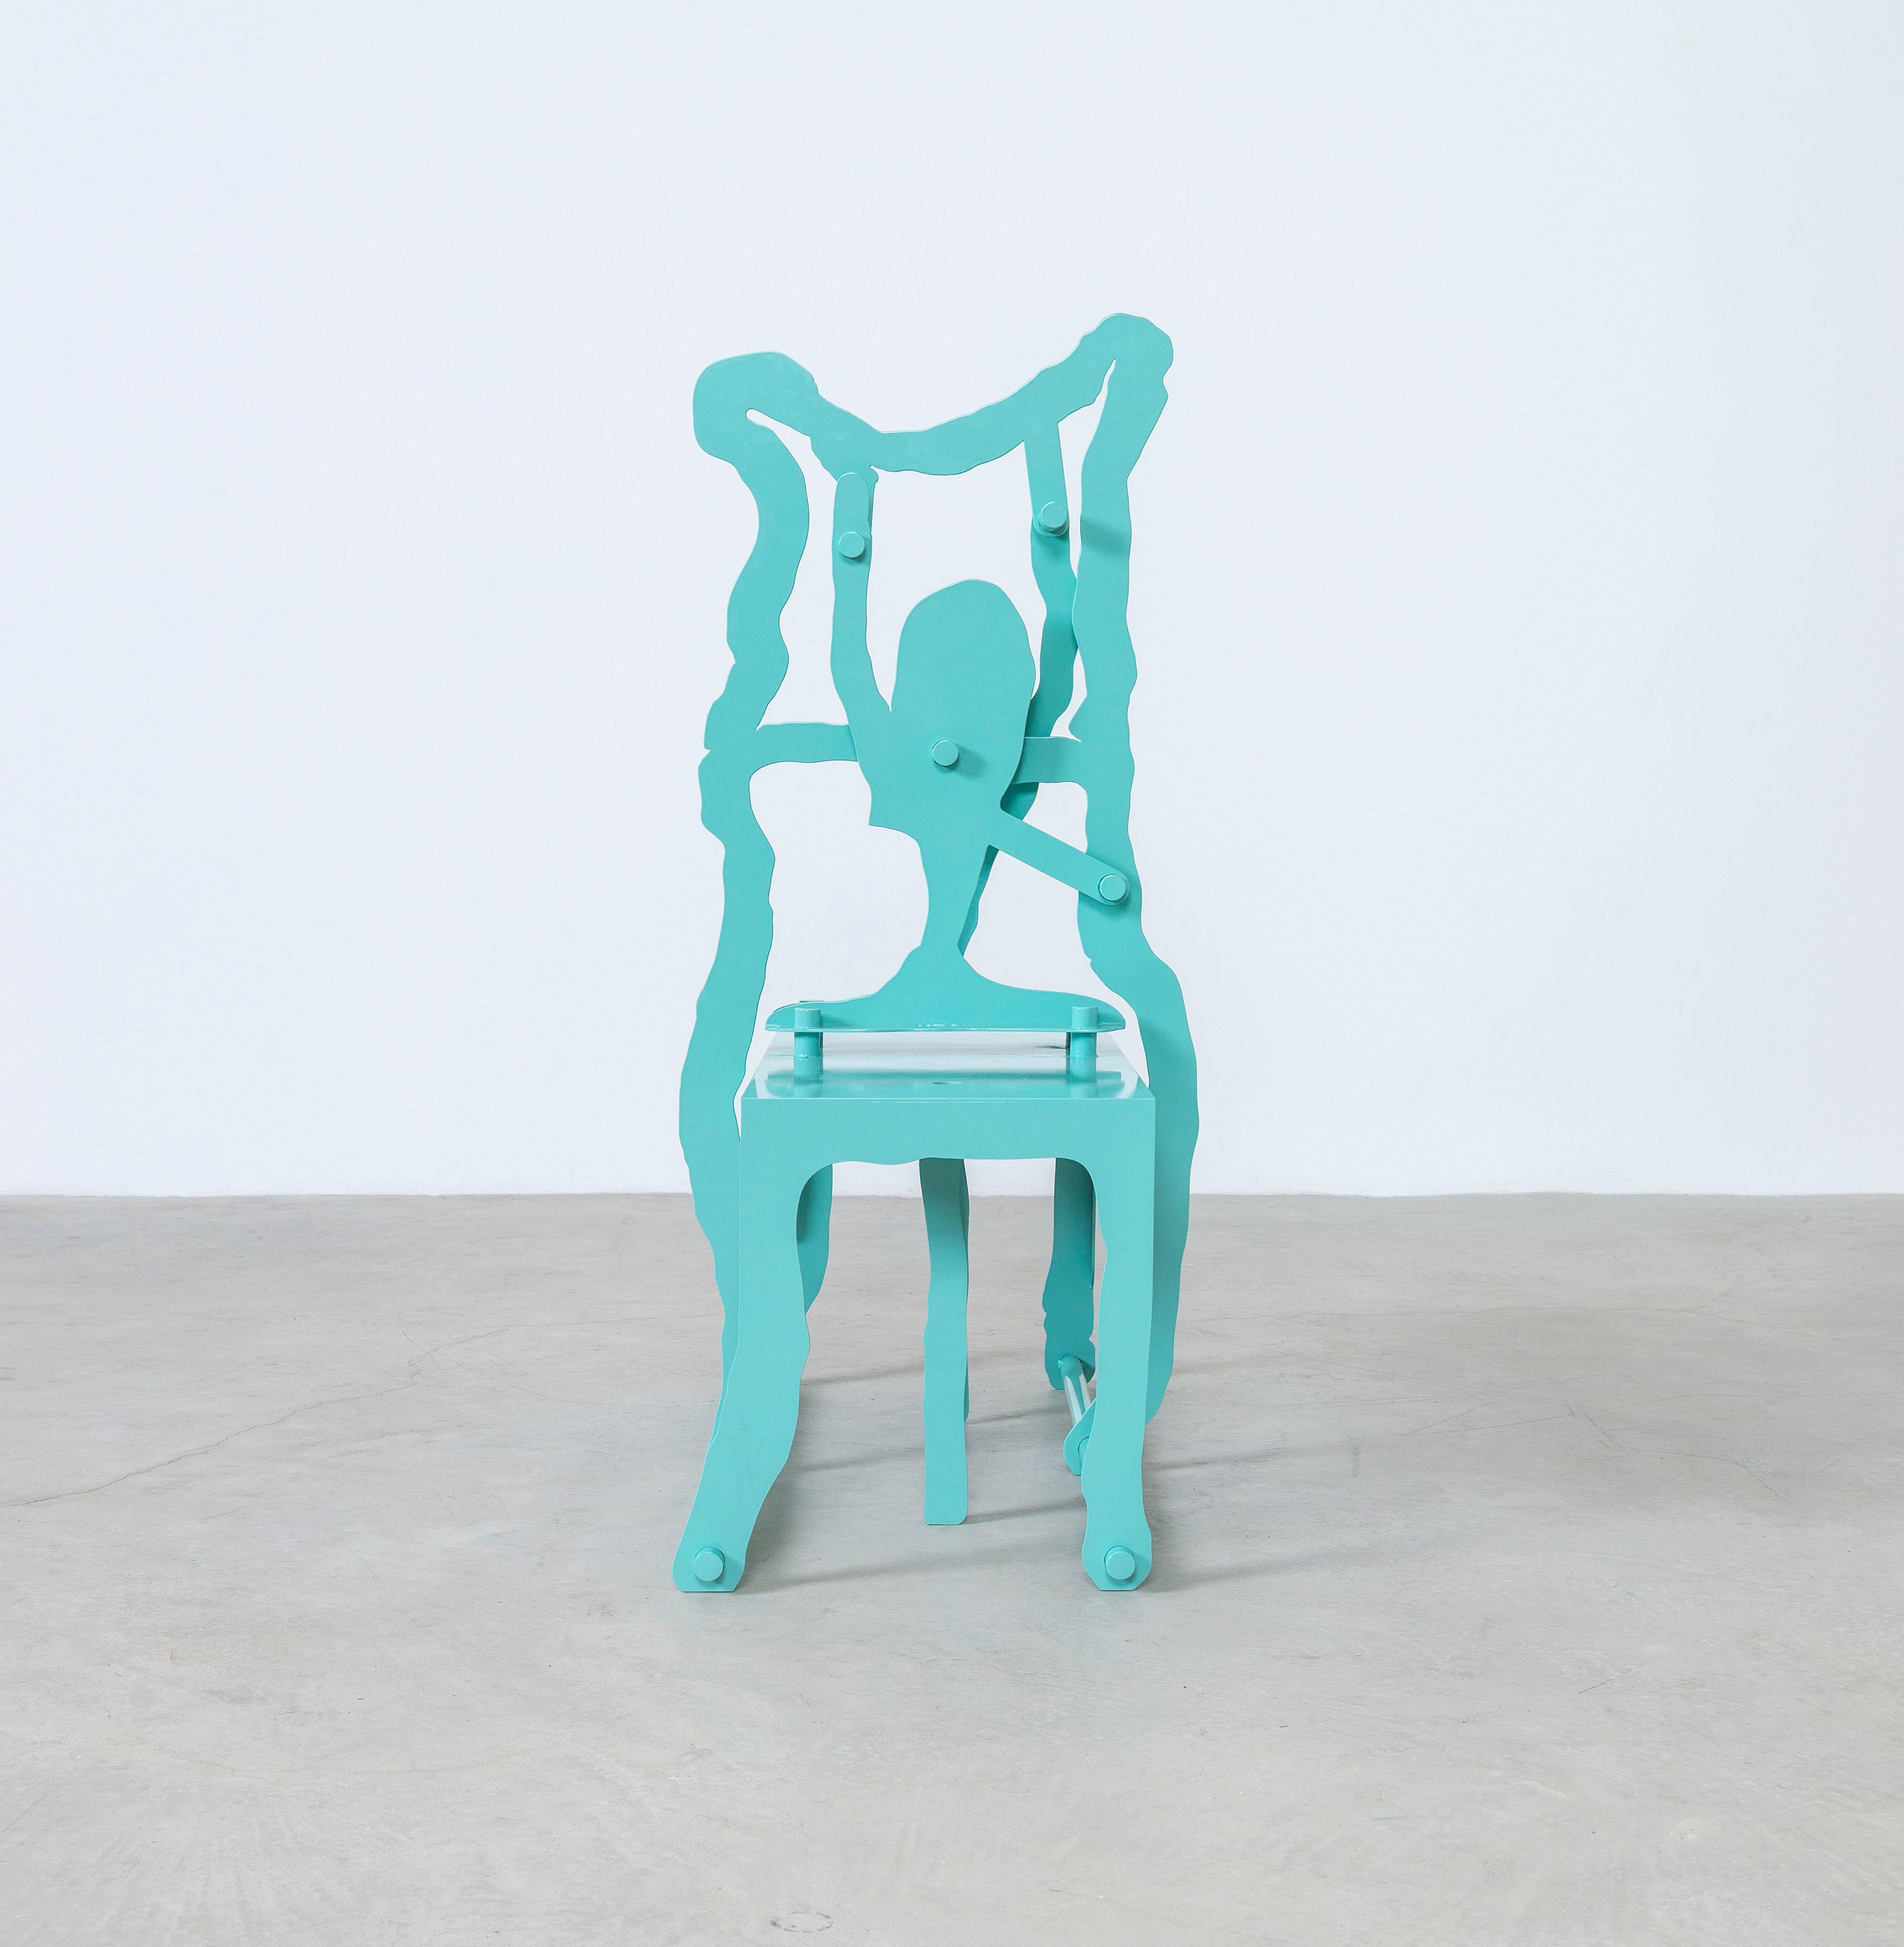 This chair was designed by Romanian artist Serban Ionescu for In Good Company. 

From impulse to measure, Ionescu scans through hundreds of his own sketches and drawings, searching for several shaped limbs or forms to stand out. He collages them